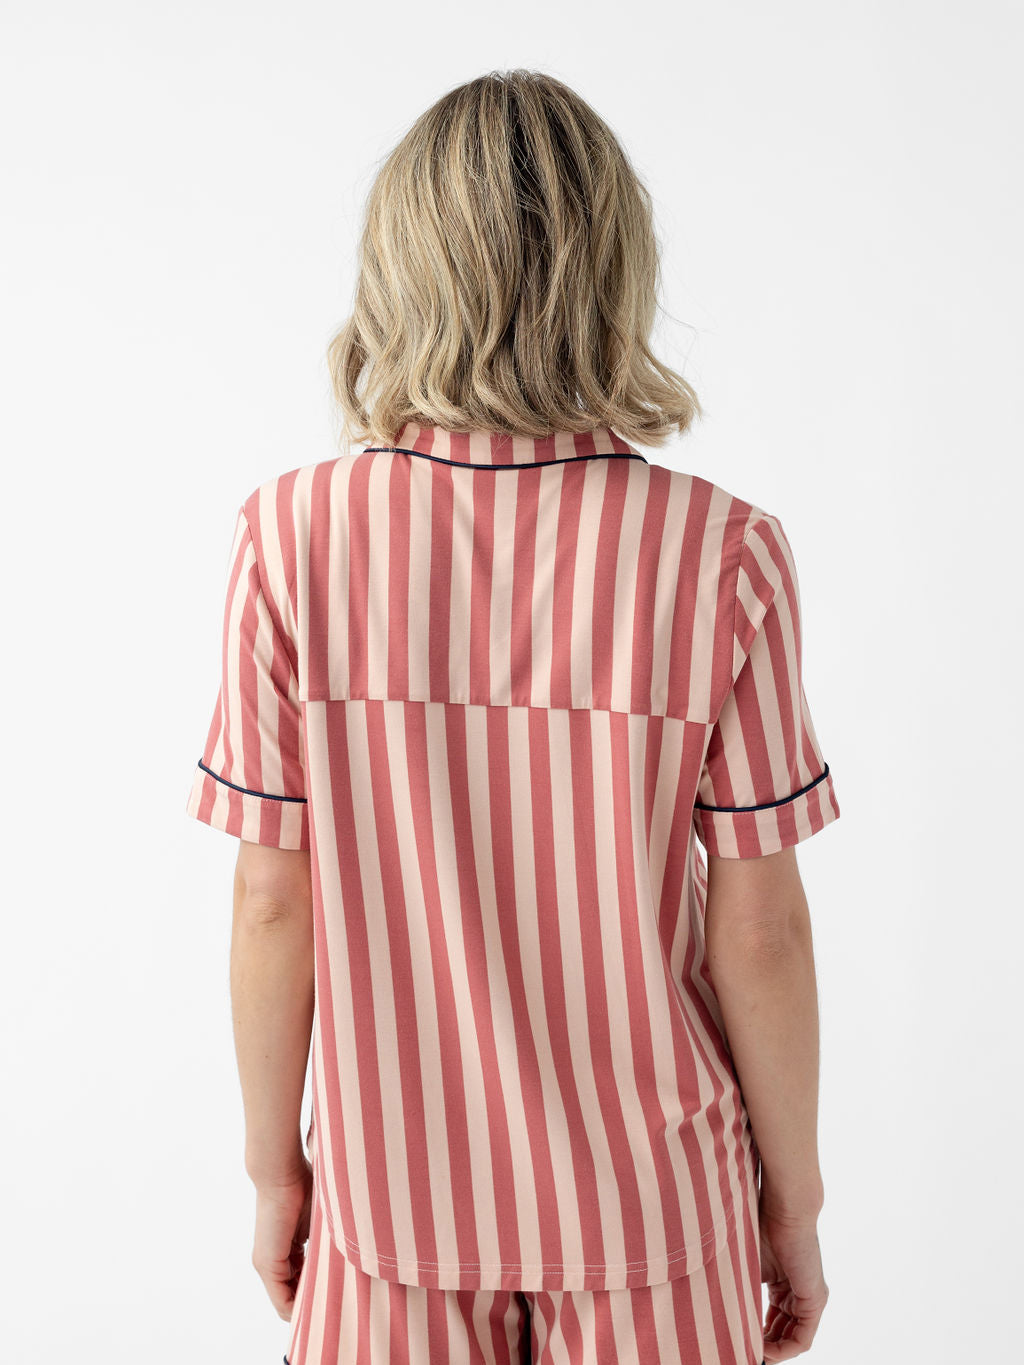 Back of woman wearing blush stripe short sleeve pajama top with white background 